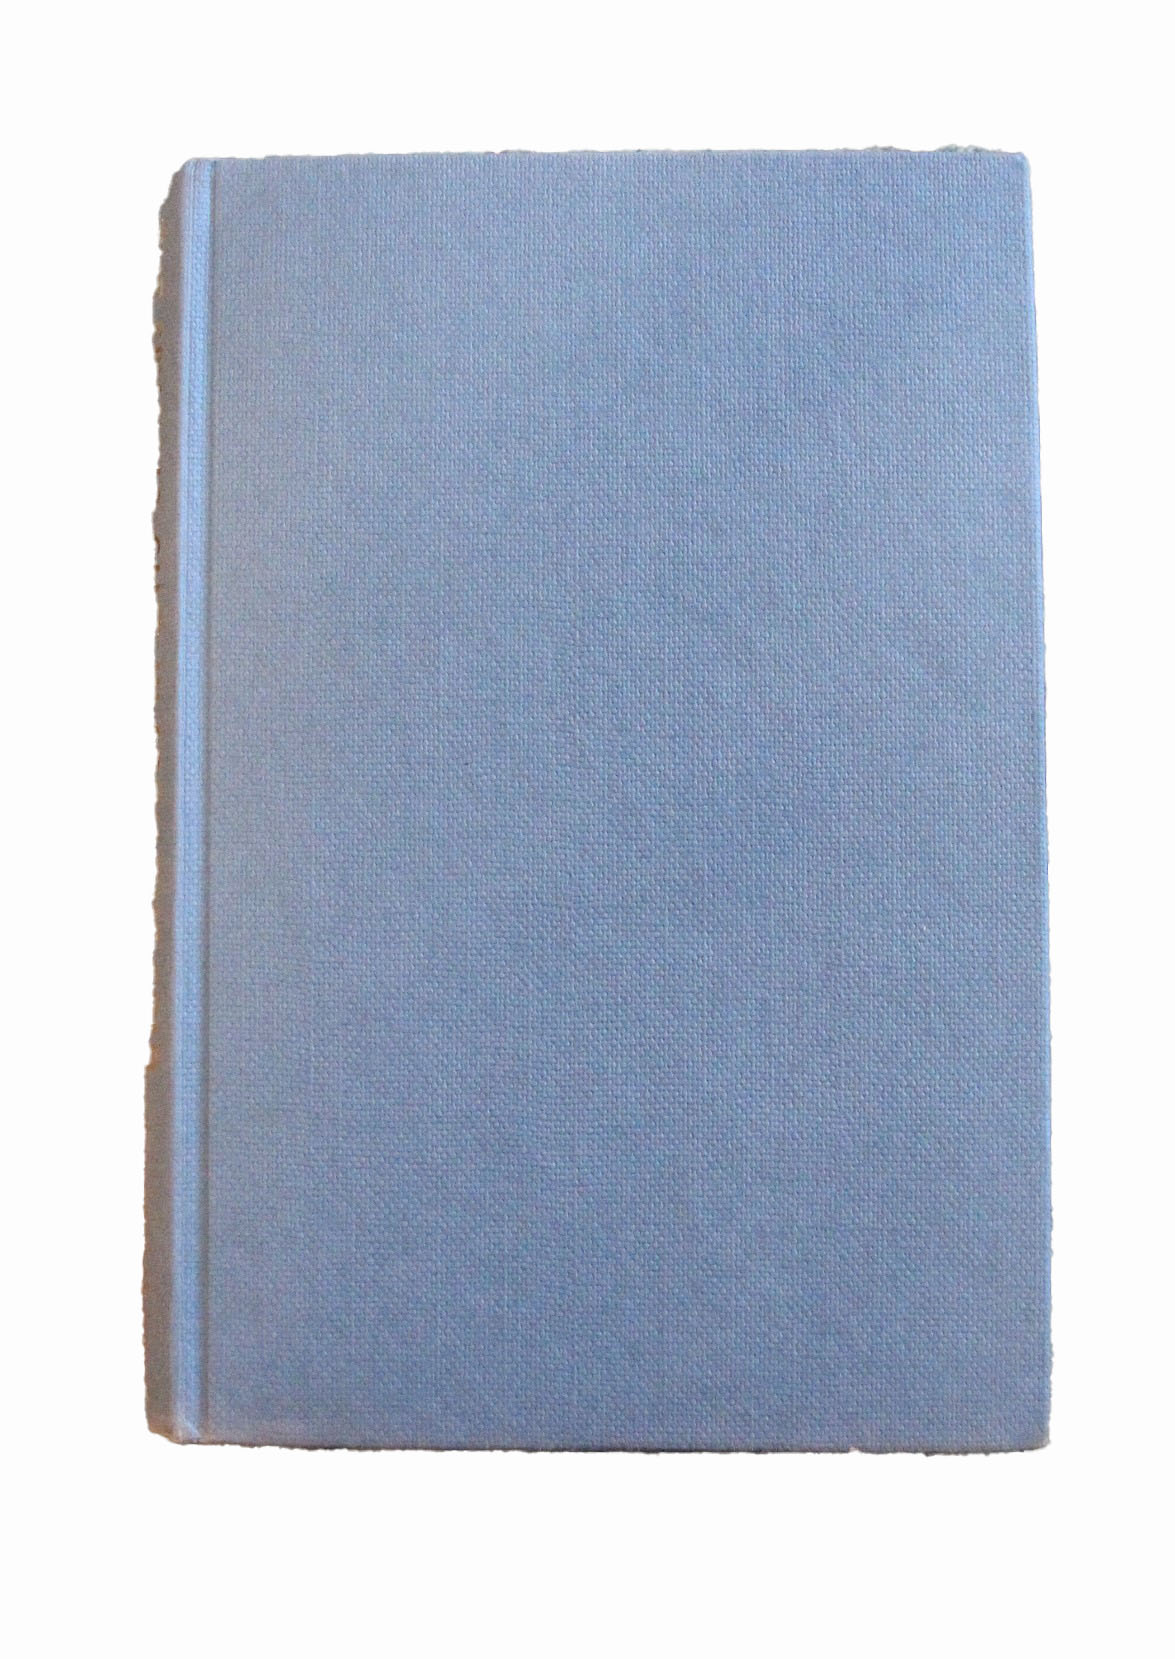 John Le Carre. The Spy Who Came From Elsewhere. Gollancz. 1st edition 1963. Dust wrapper, slightly - Image 8 of 8